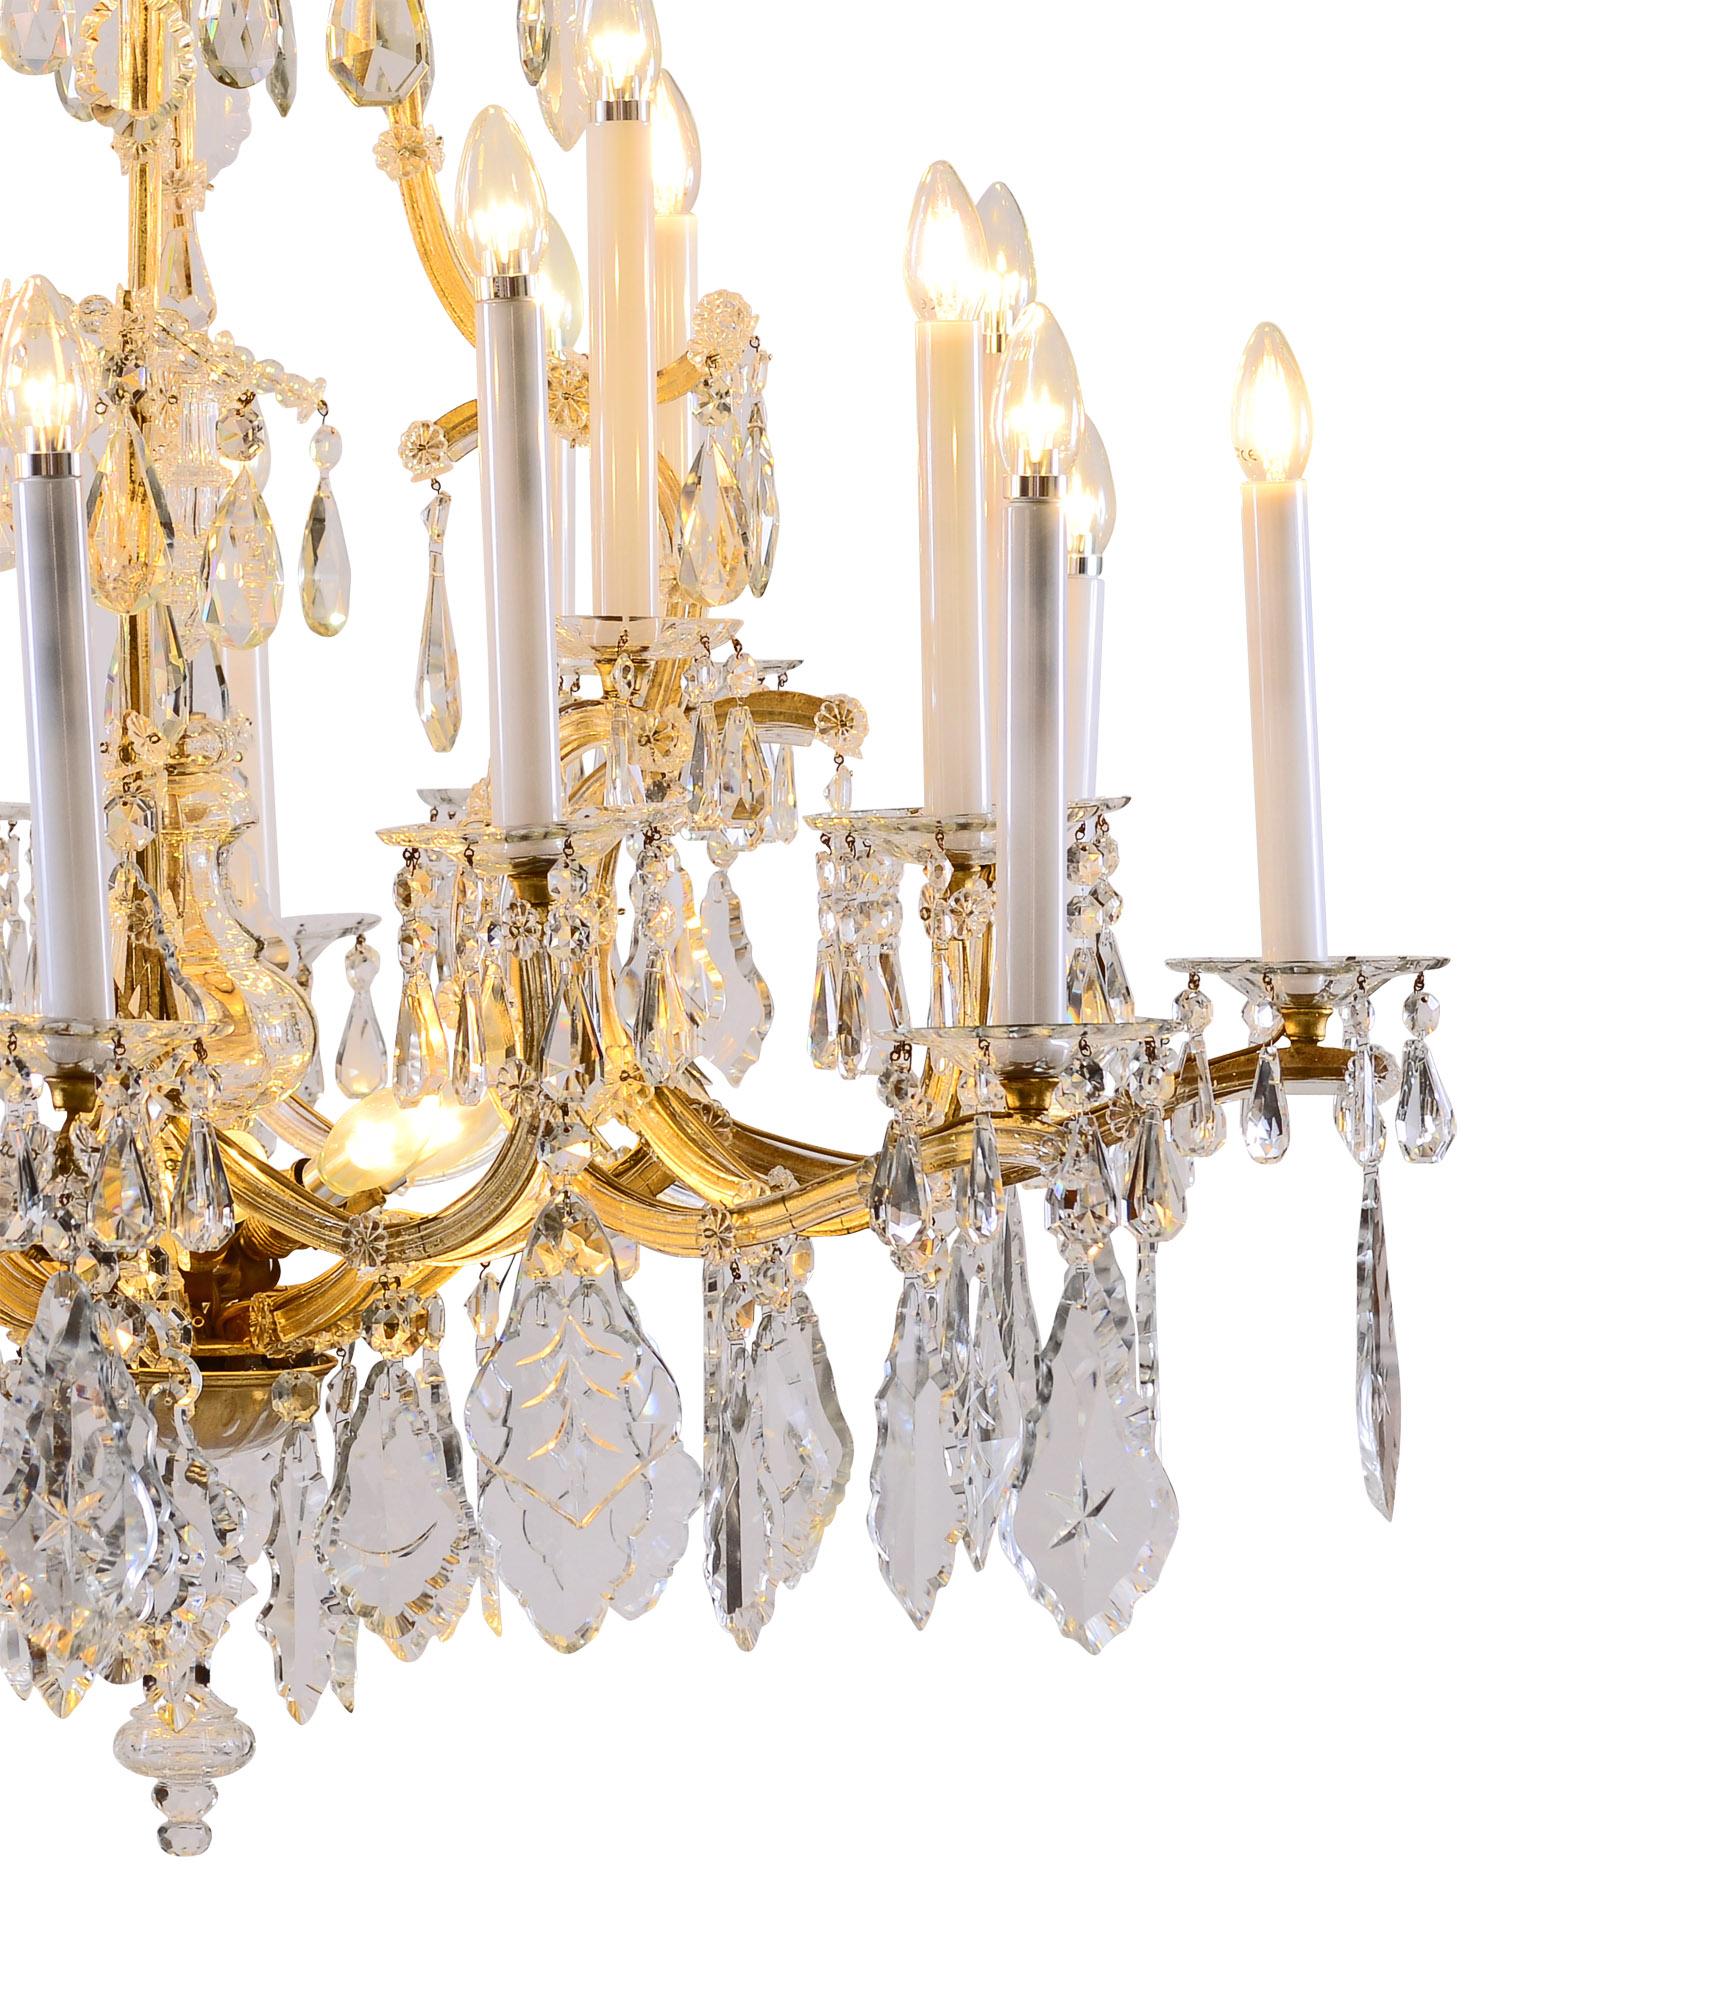 Very large Maria Theresa chandelier with 28 candles material metal frame with baluster decoration in the center, richly decorated with glass prism
This chandlier is in perfect condition and suitable for the US 
 